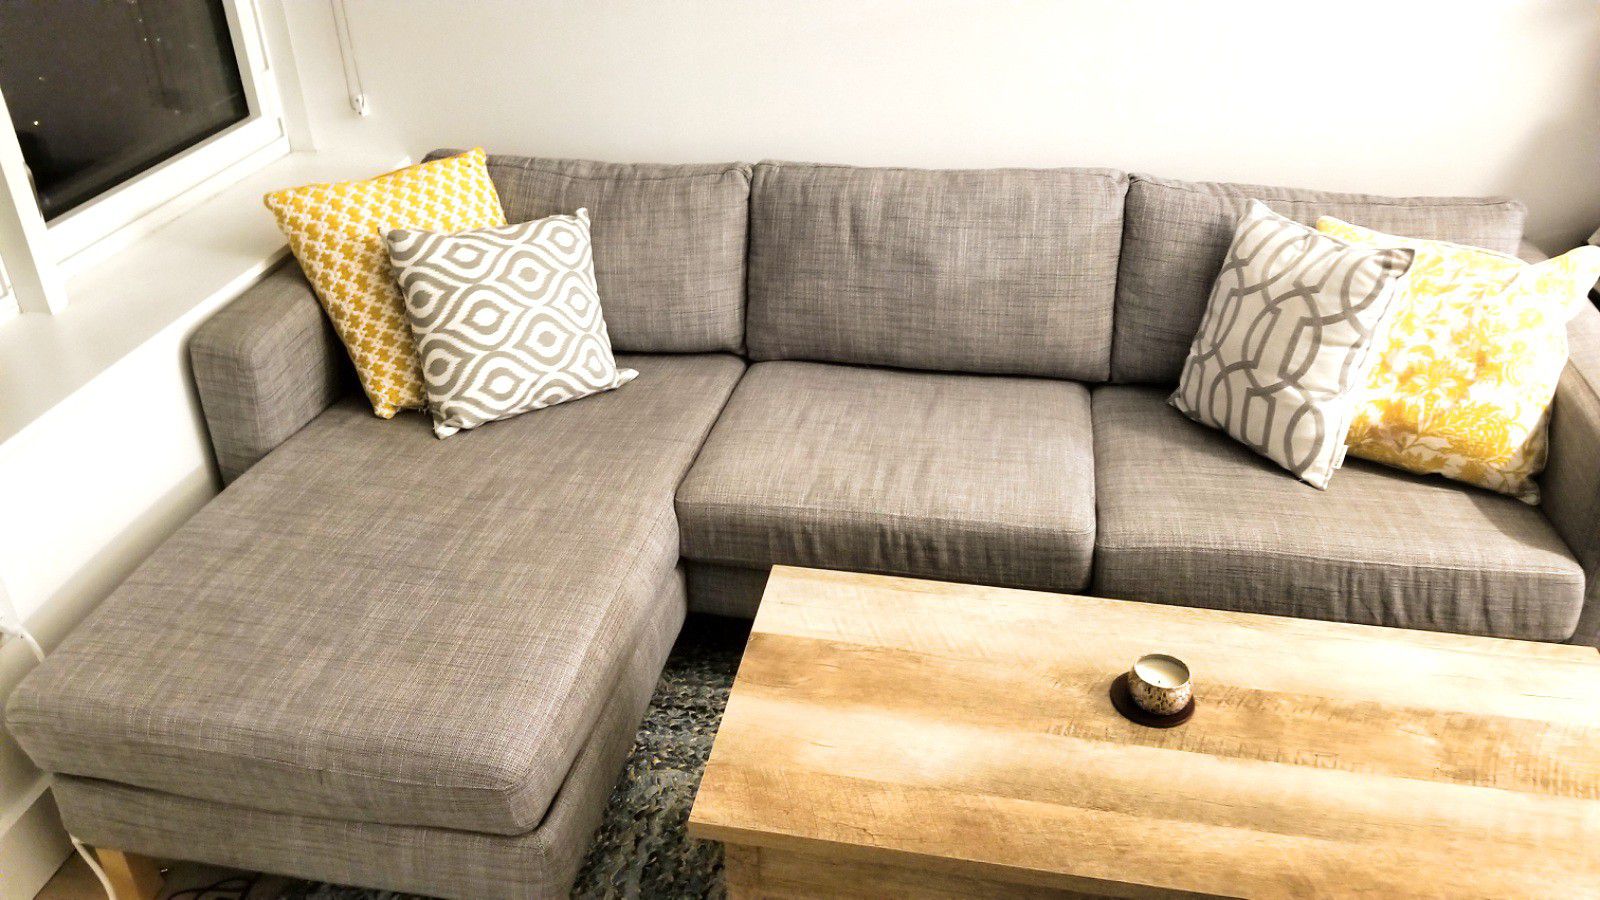 Grey Ikea karlstad couch/ sectional